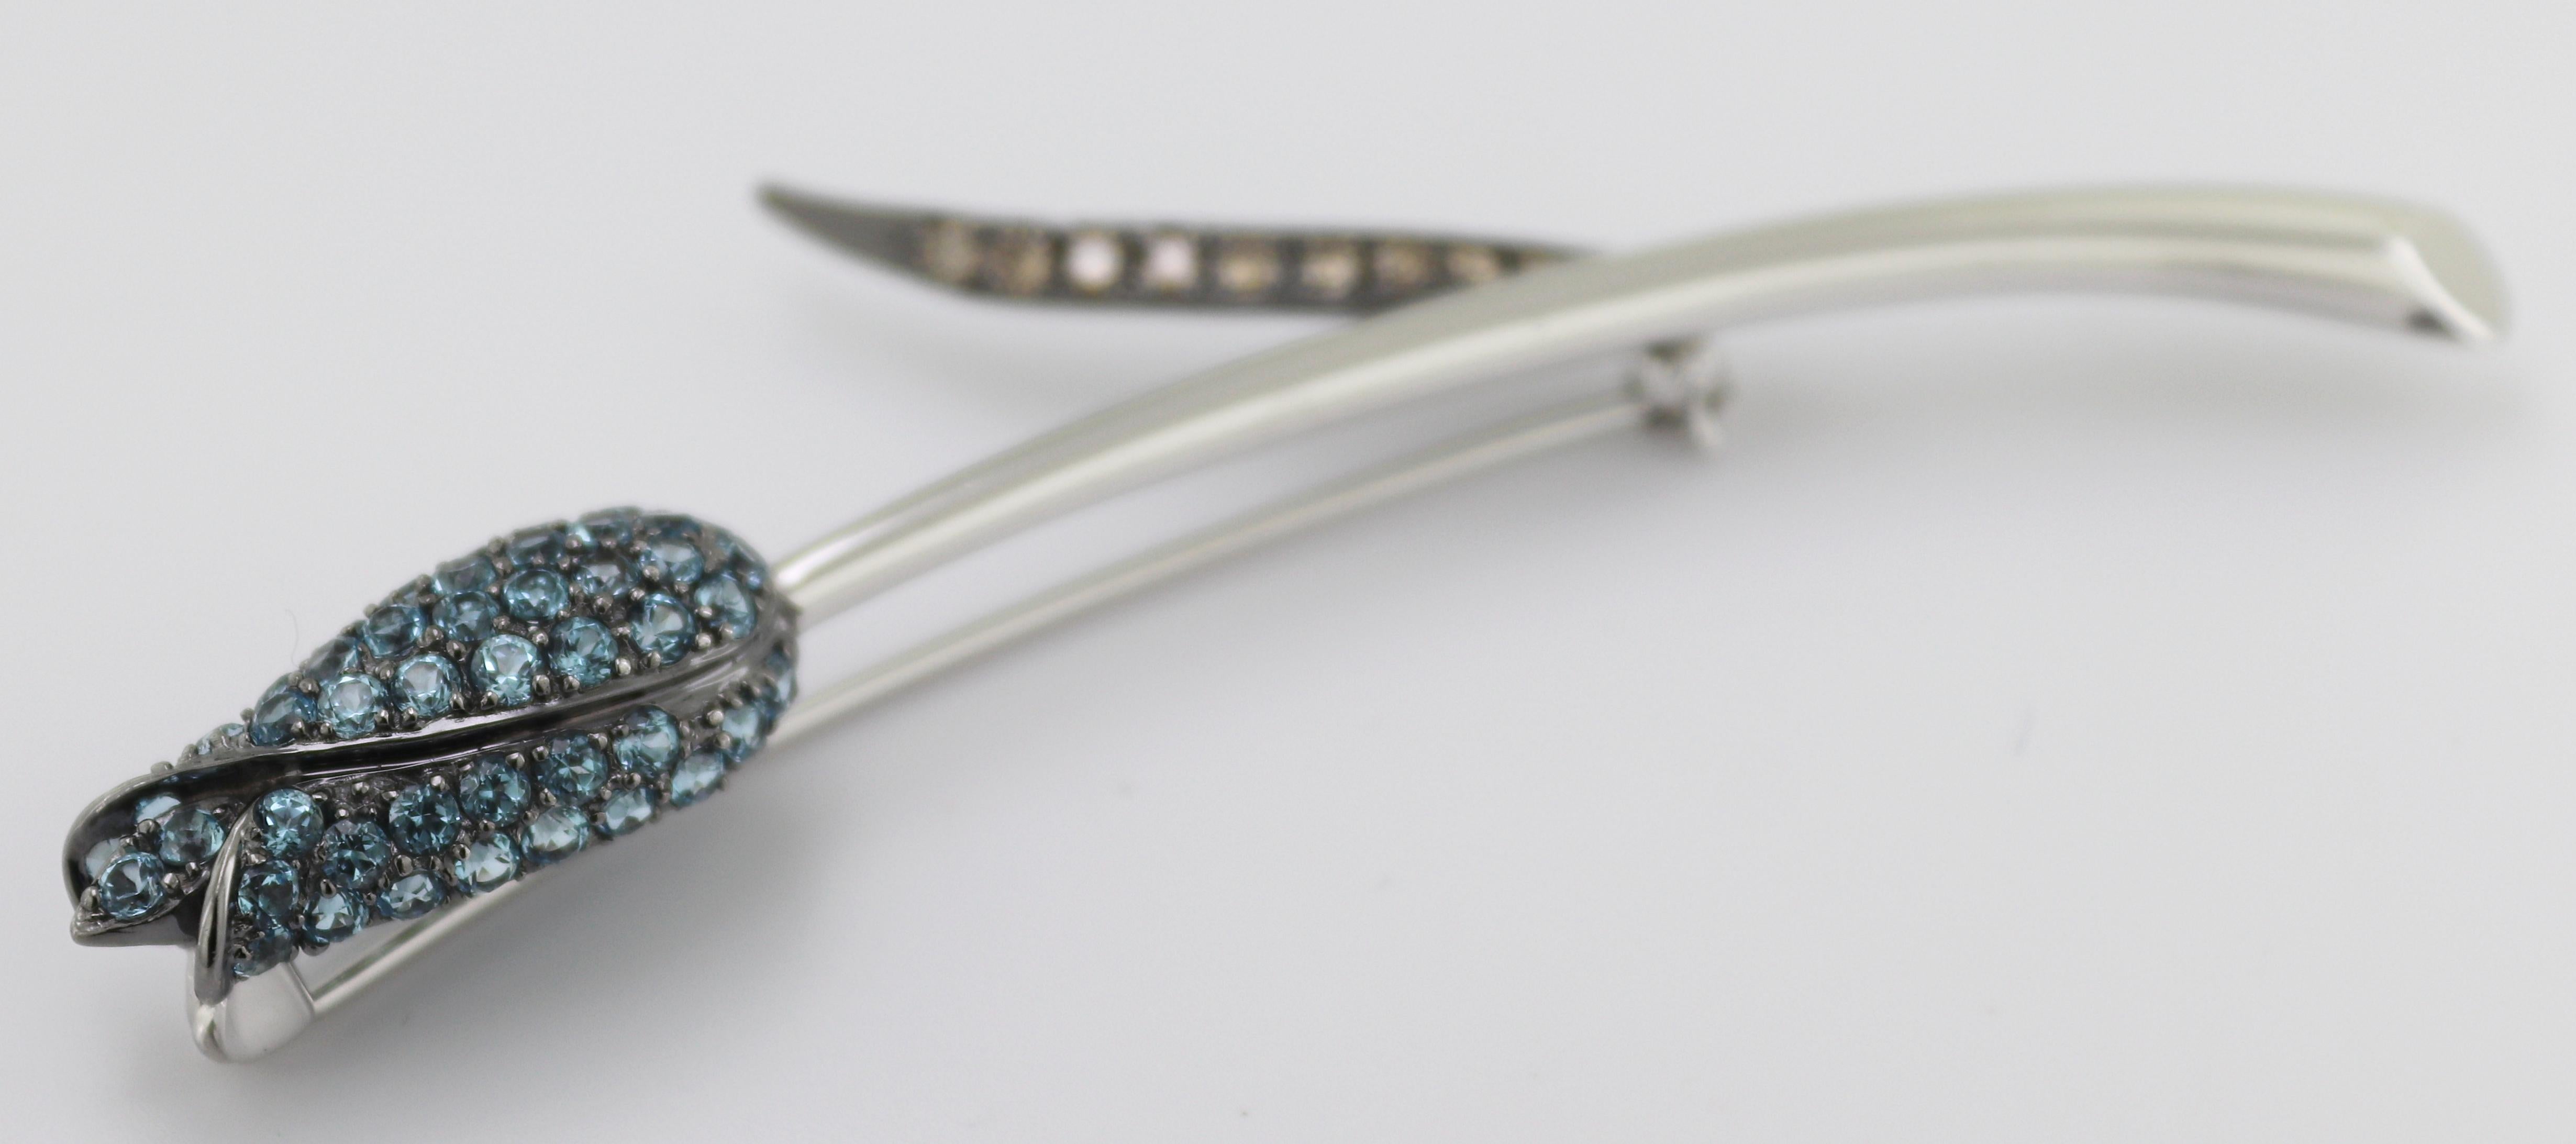 Featuring (54) round-cut blue topaz, accented by (9) full-cut chocolate
diamonds, 0.30 ct, tw., pave set in a blackened, 18k white gold tulip
mounting, 77 X 32 X 10.8 mm, completed by a pin stem and catch, Gross
Weight 8.73 grams.